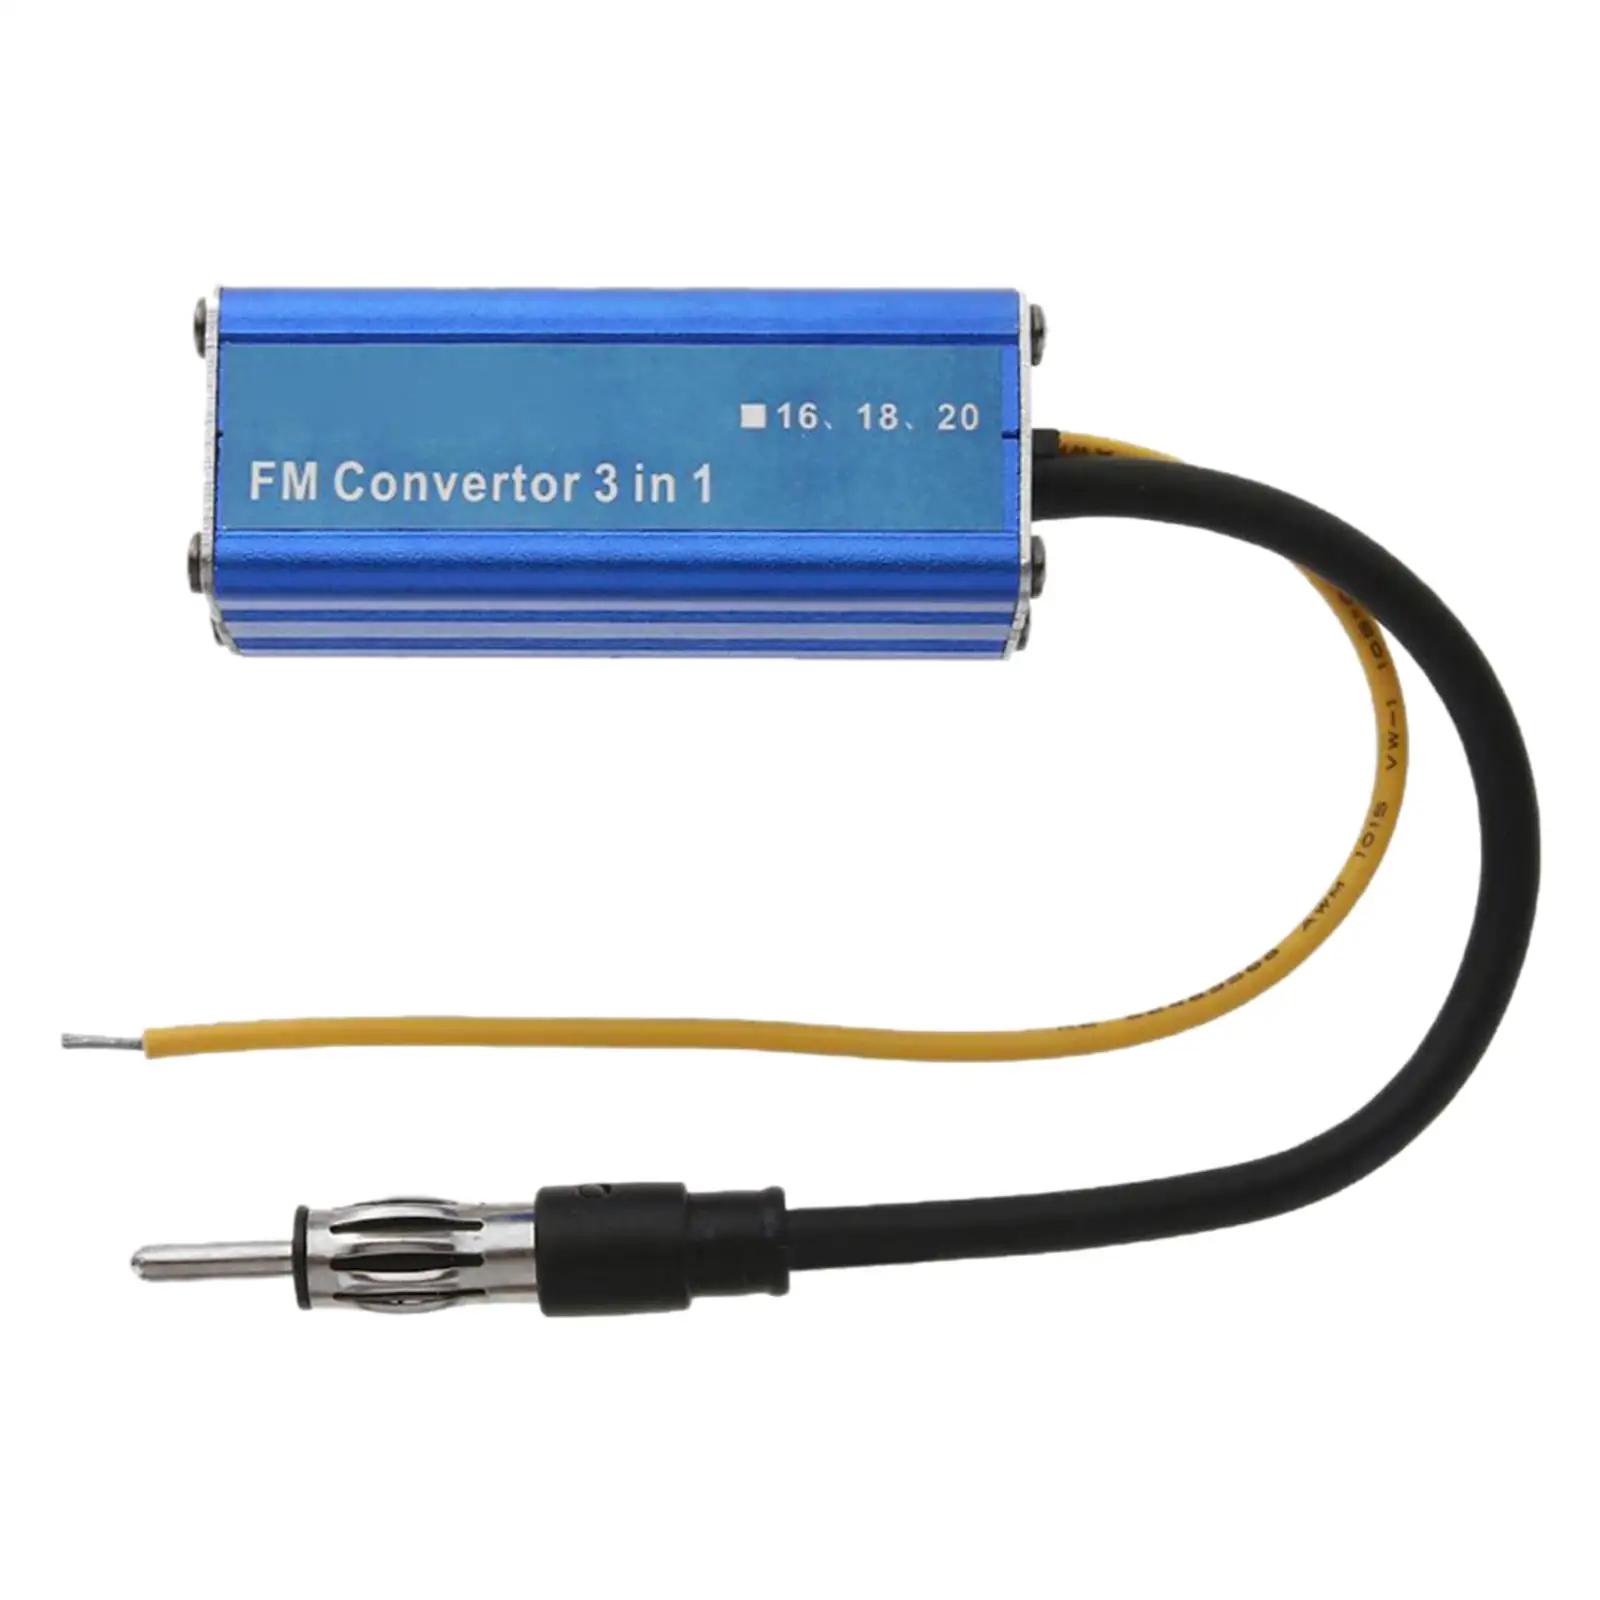 FM Converter, Band Expander, Convert FM Accessories Stereo Radio for Sony 76-90MHz